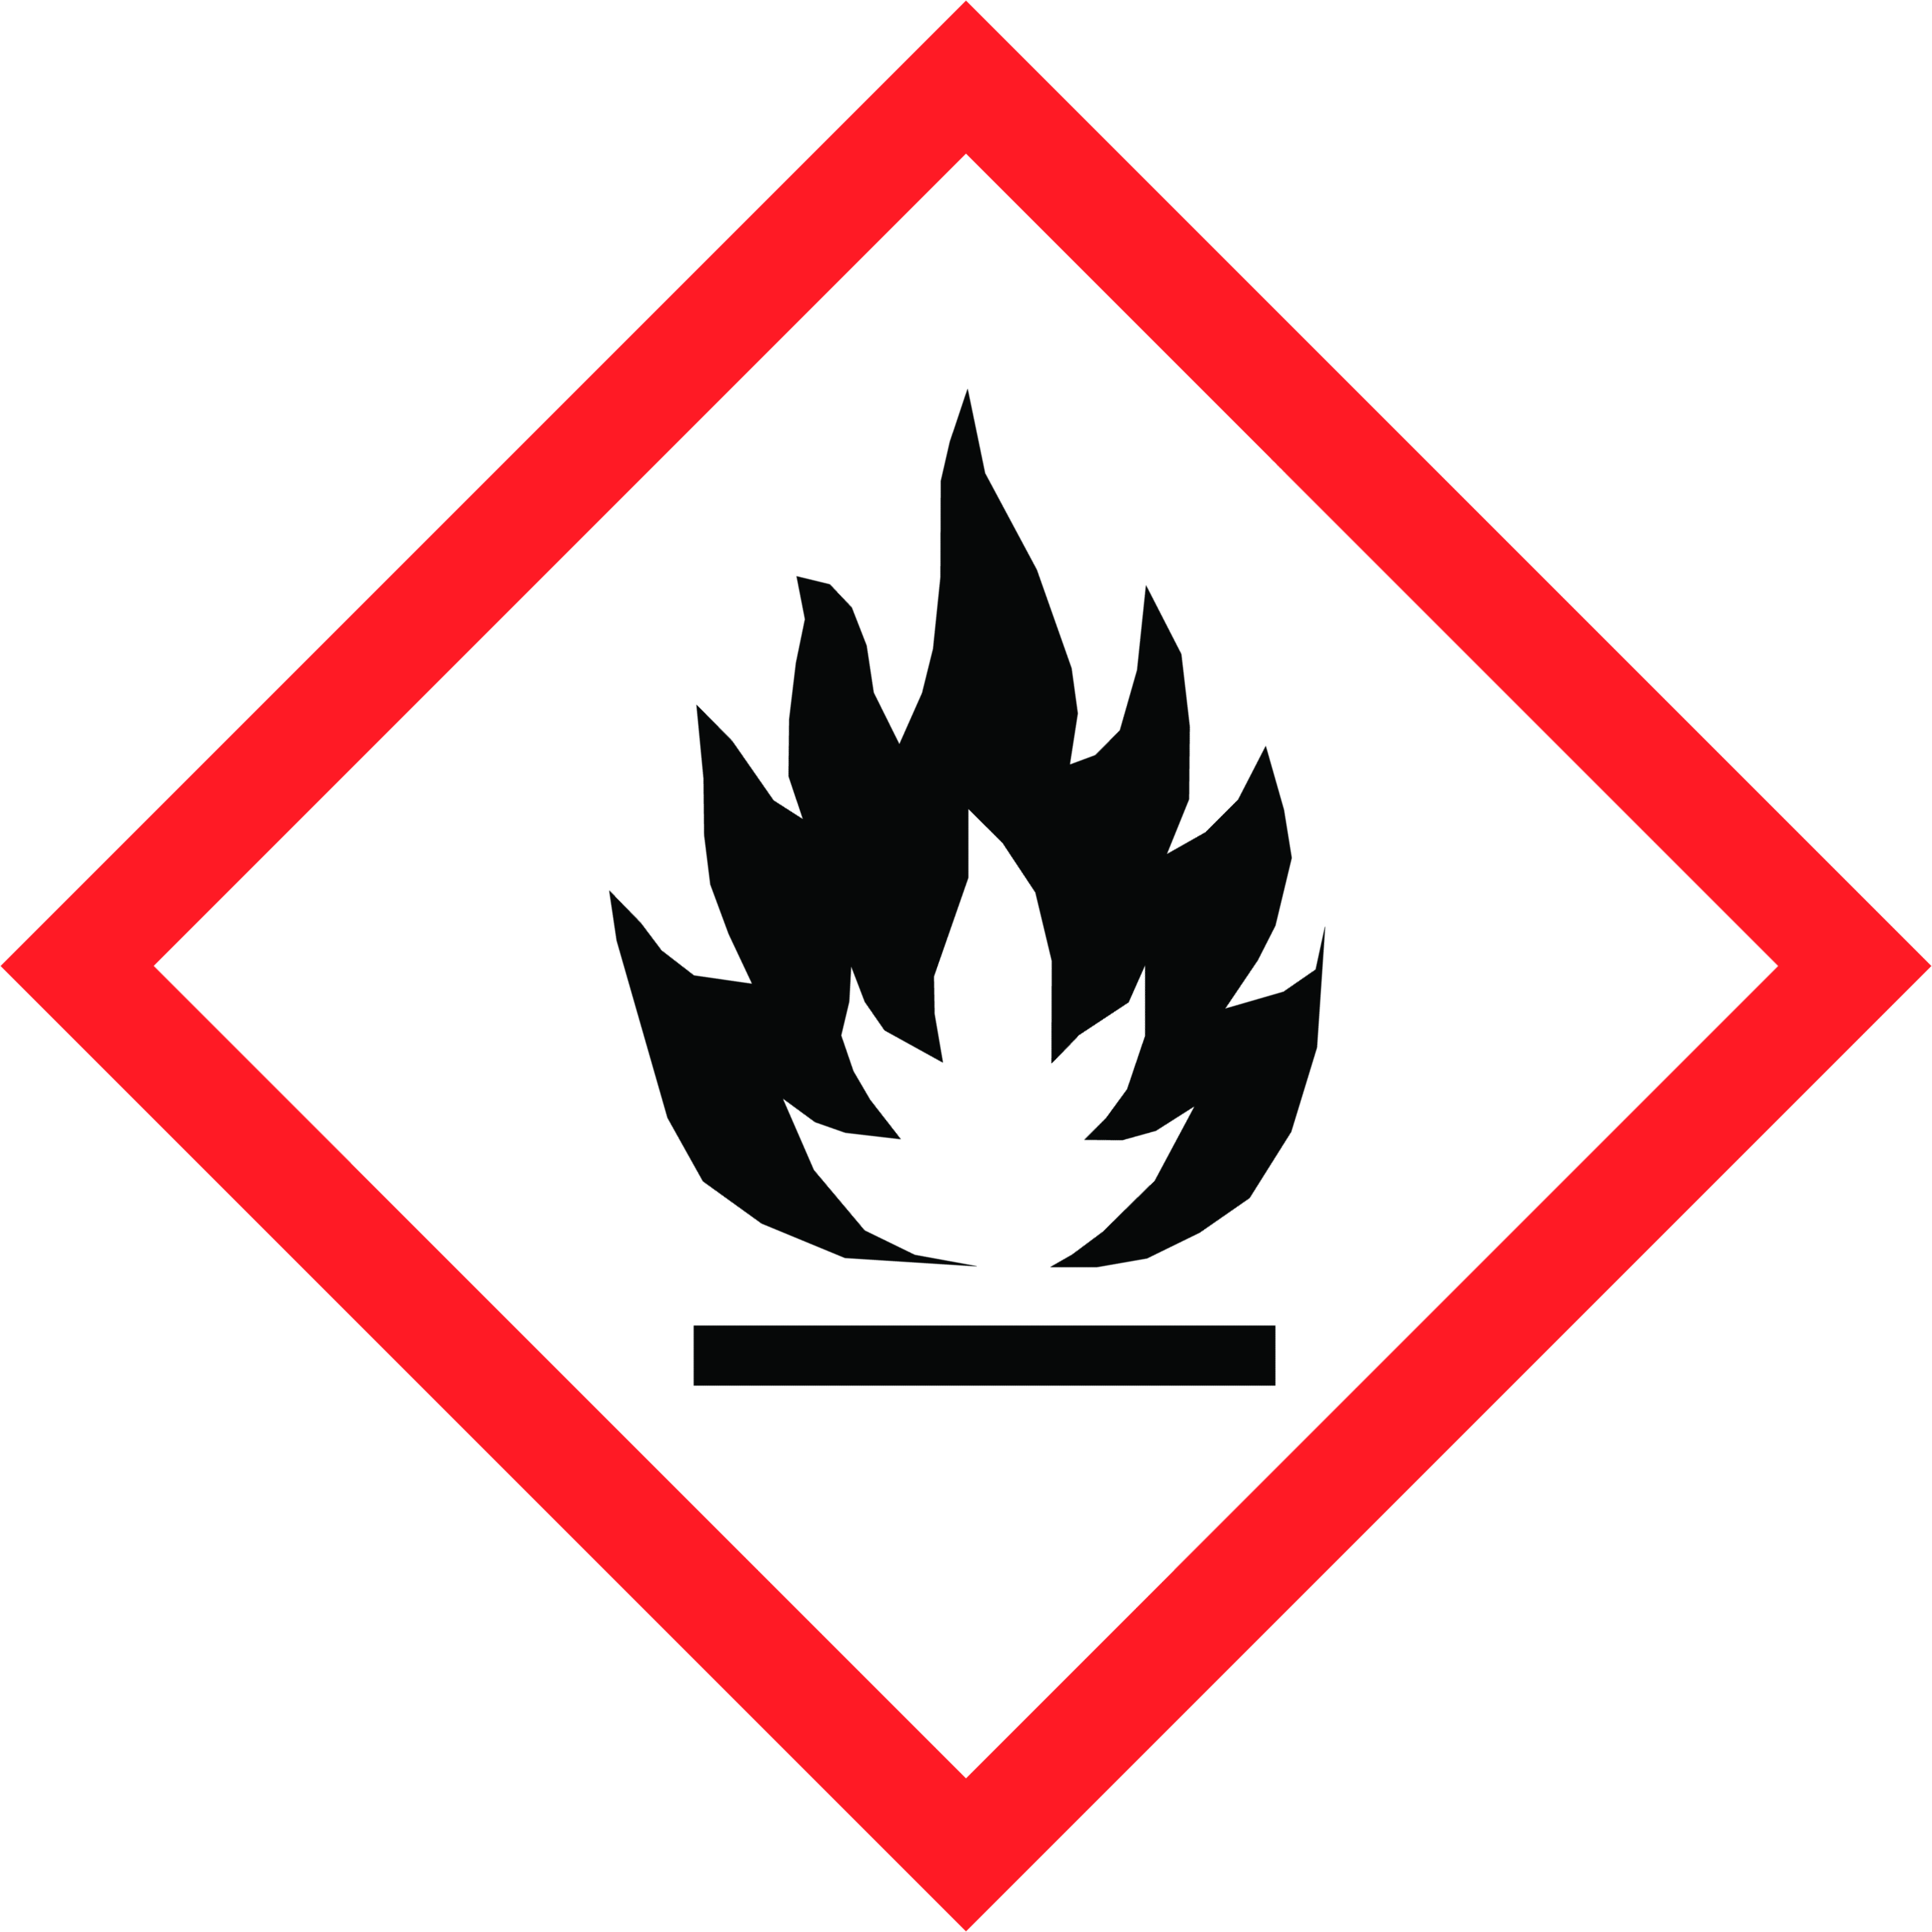 GHS02 Pictogram: Flammable